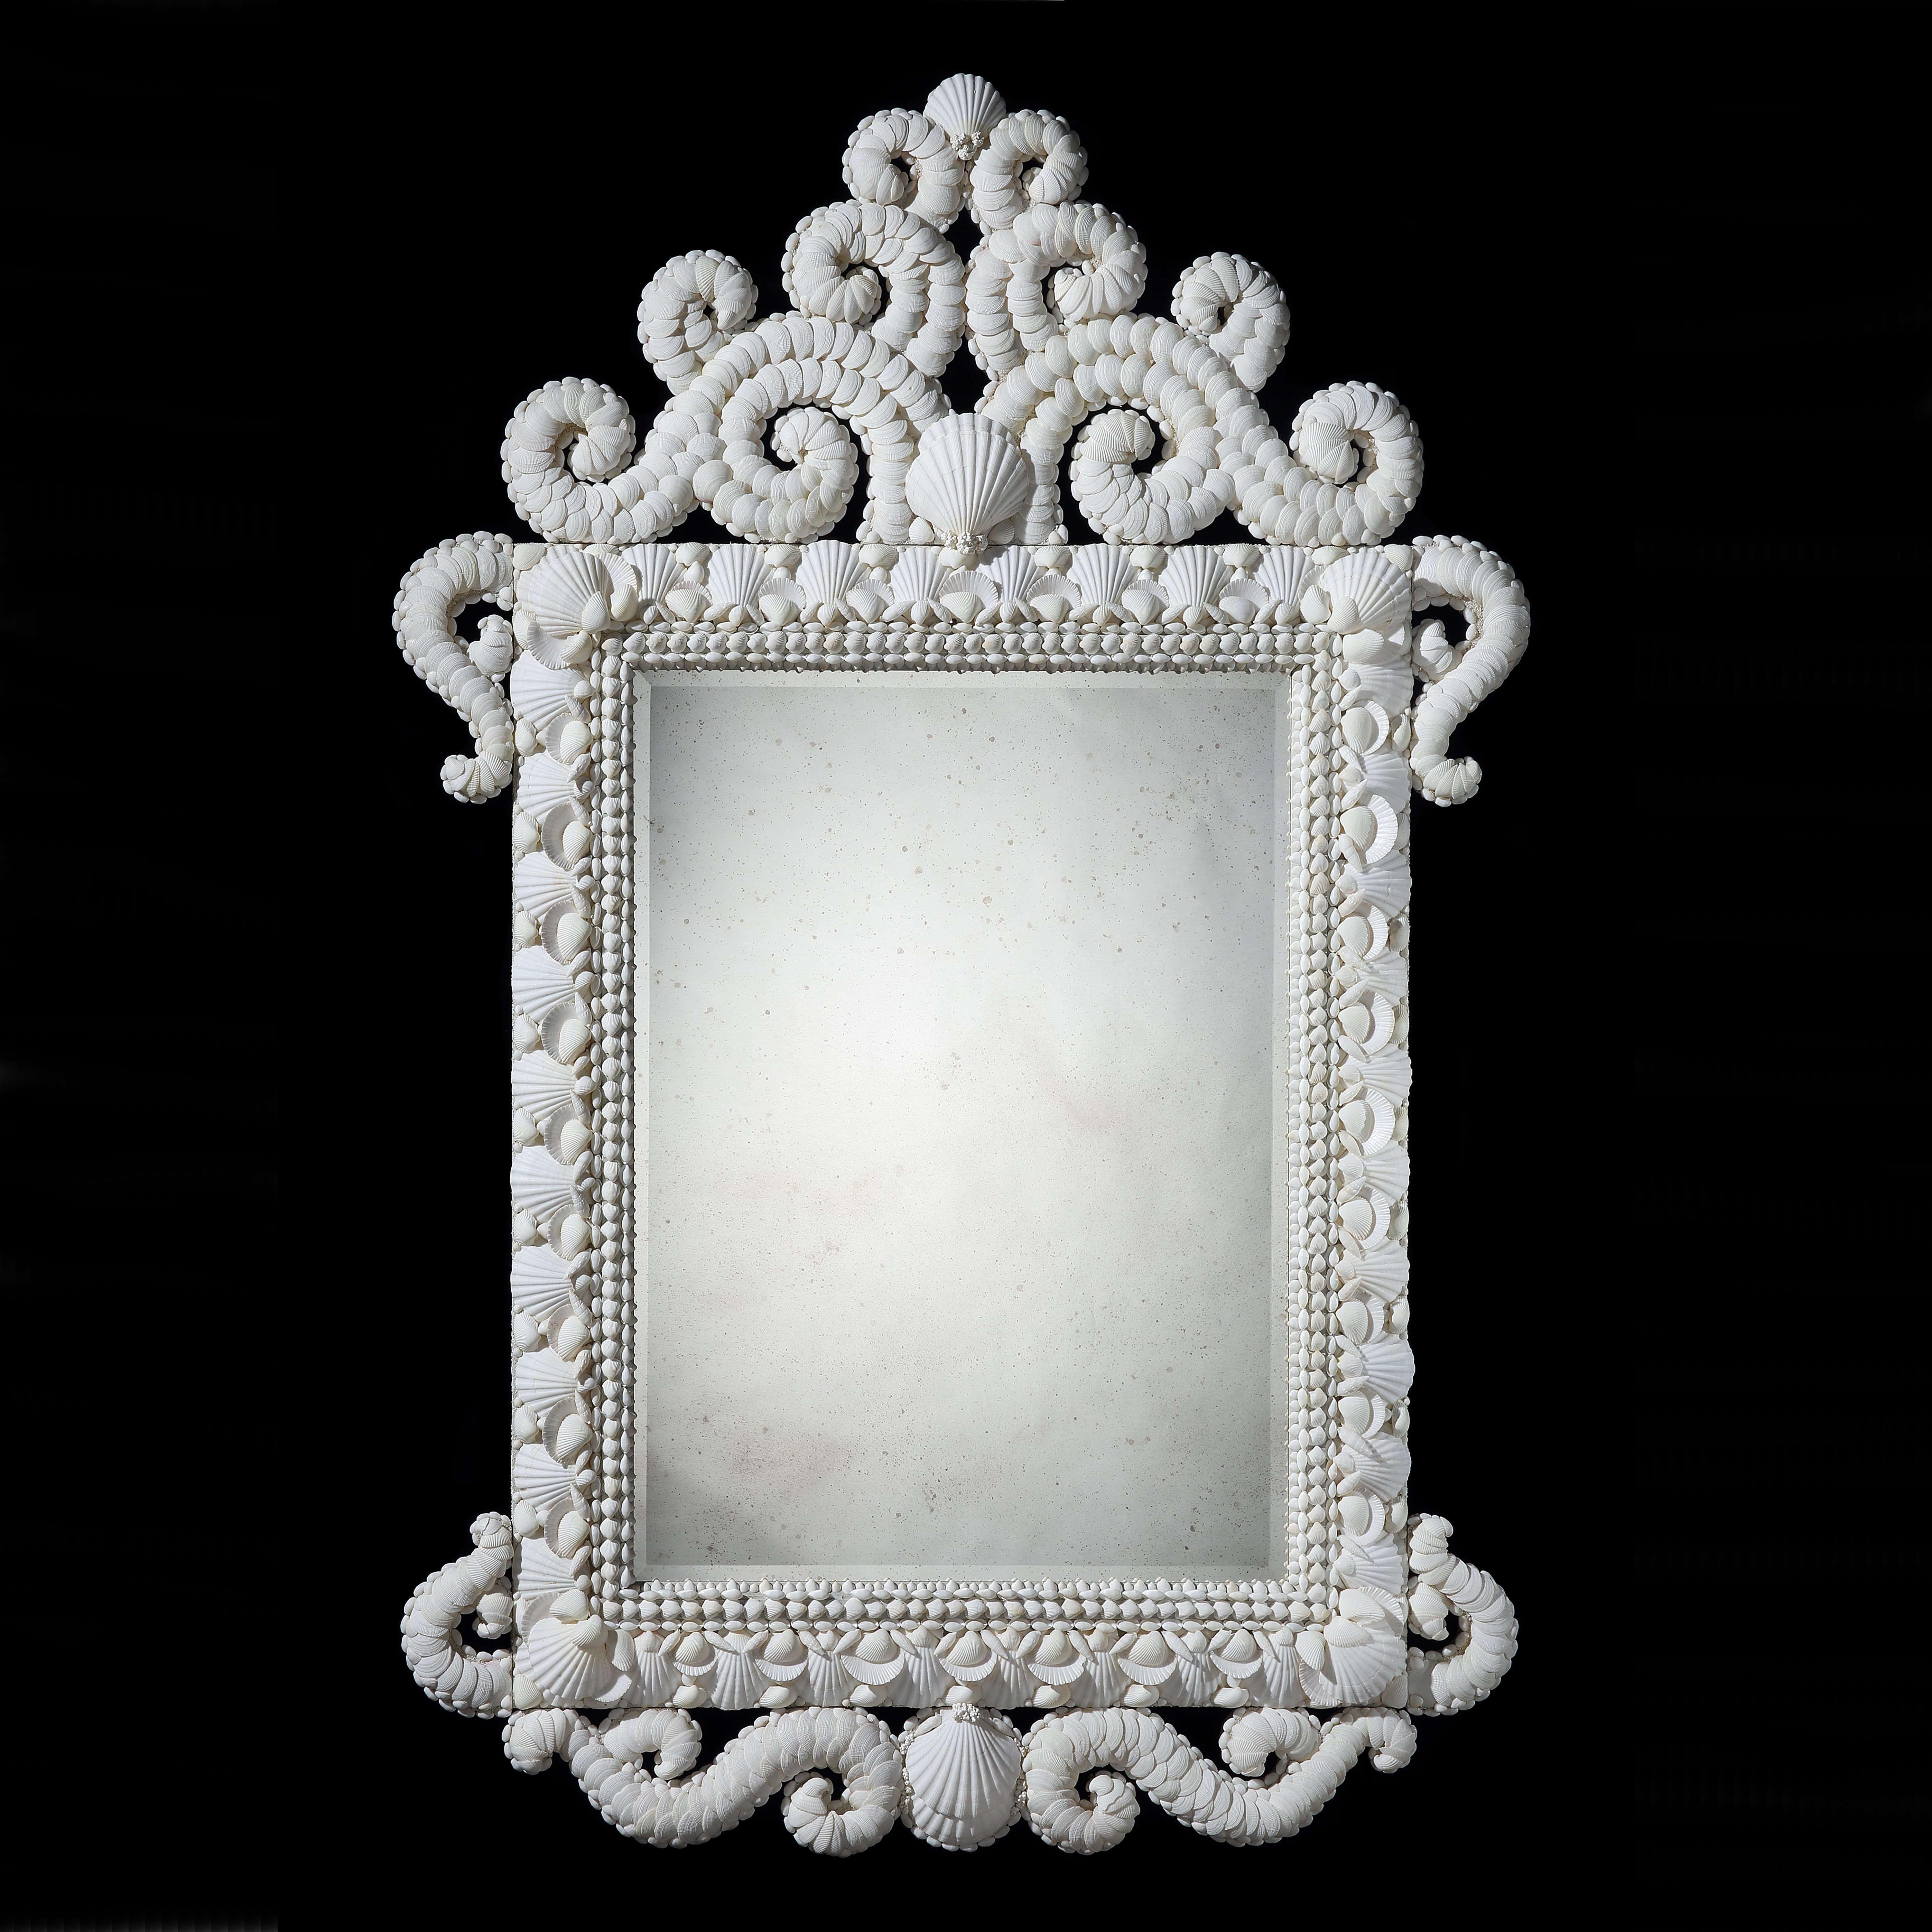 +VAT.

England, modern. Made to order.

A very fine white shell mirror of large scale with cresting and scrolled sides and apron. The mirror plate beveled and hand distressed.

By Tess Morley.

Framed Width 130.00cm
Framed Height 200.00cm
Please